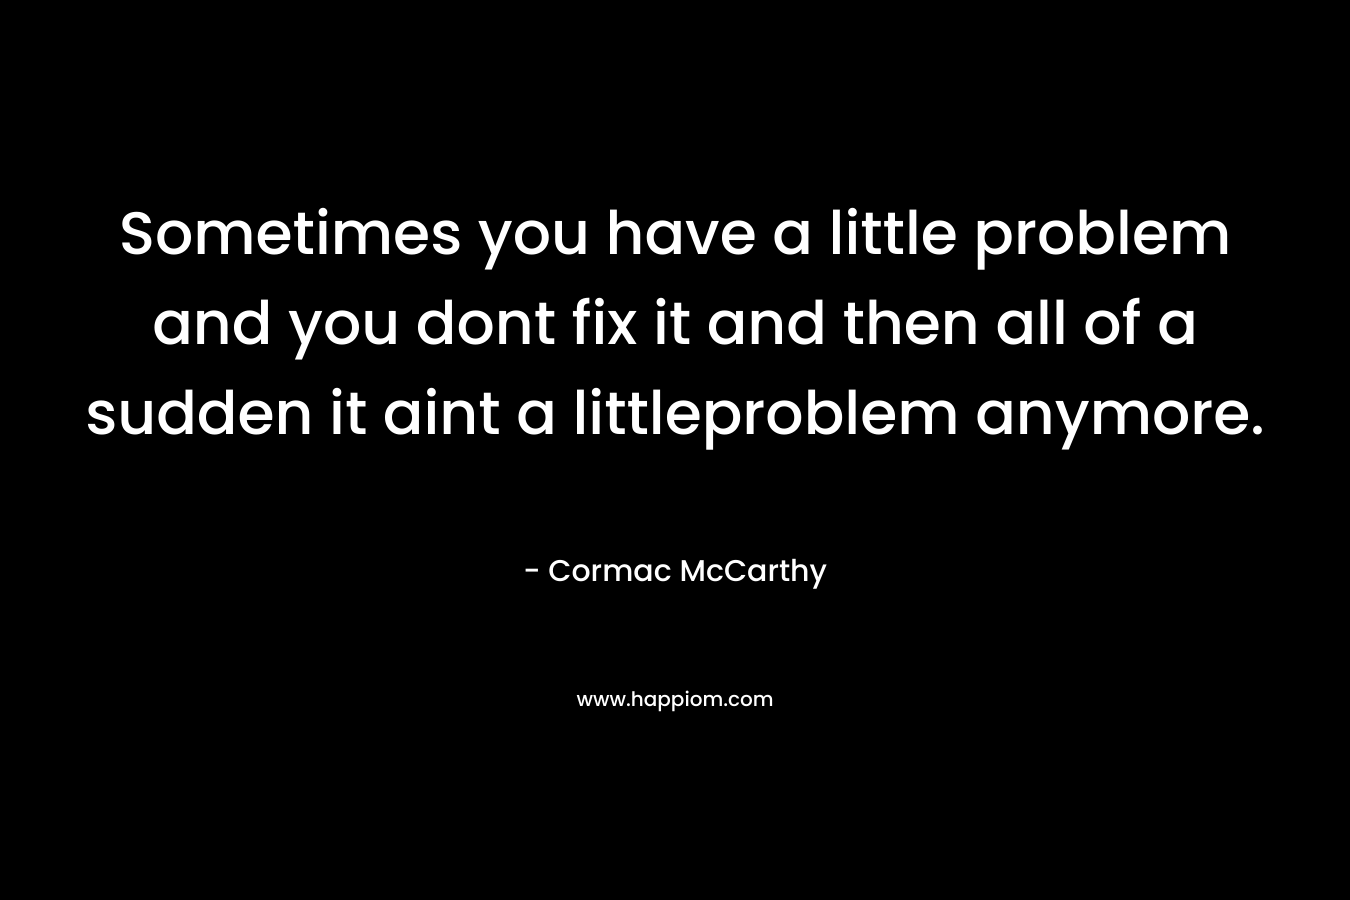 Sometimes you have a little problem and you dont fix it and then all of a sudden it aint a littleproblem anymore. – Cormac McCarthy